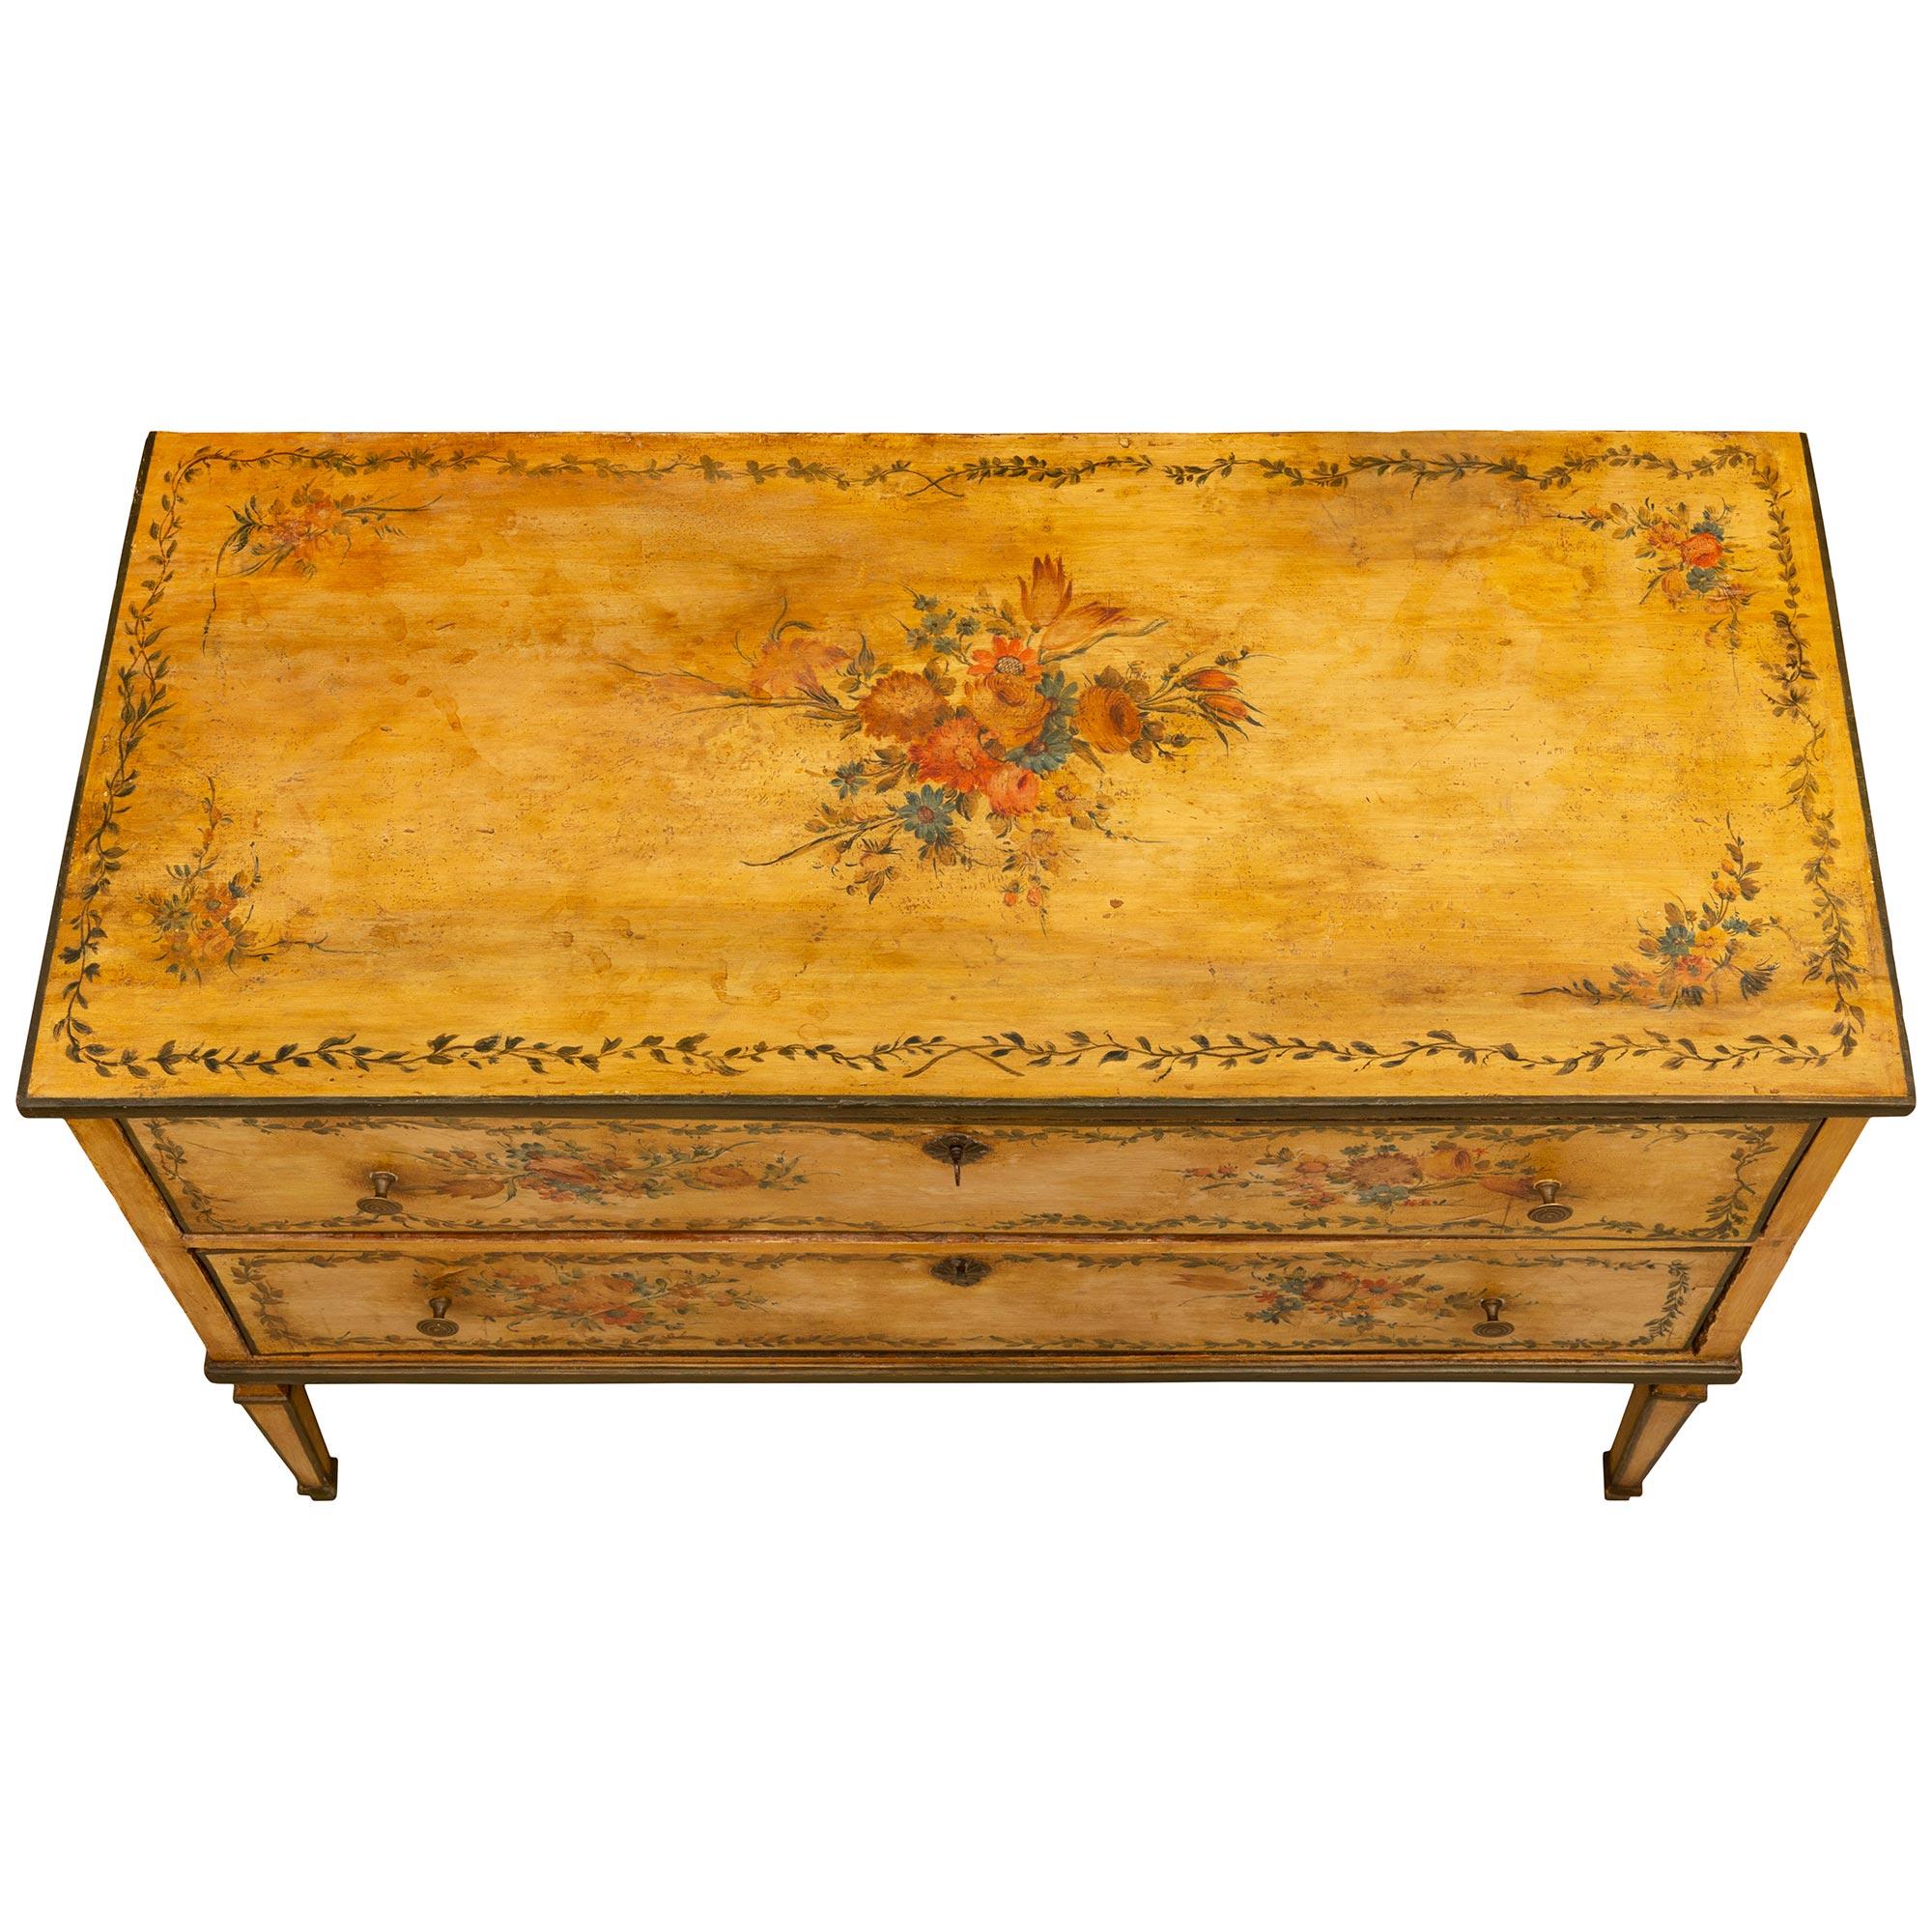 Italian 18th century Venetian st. hand painted commode For Sale 7